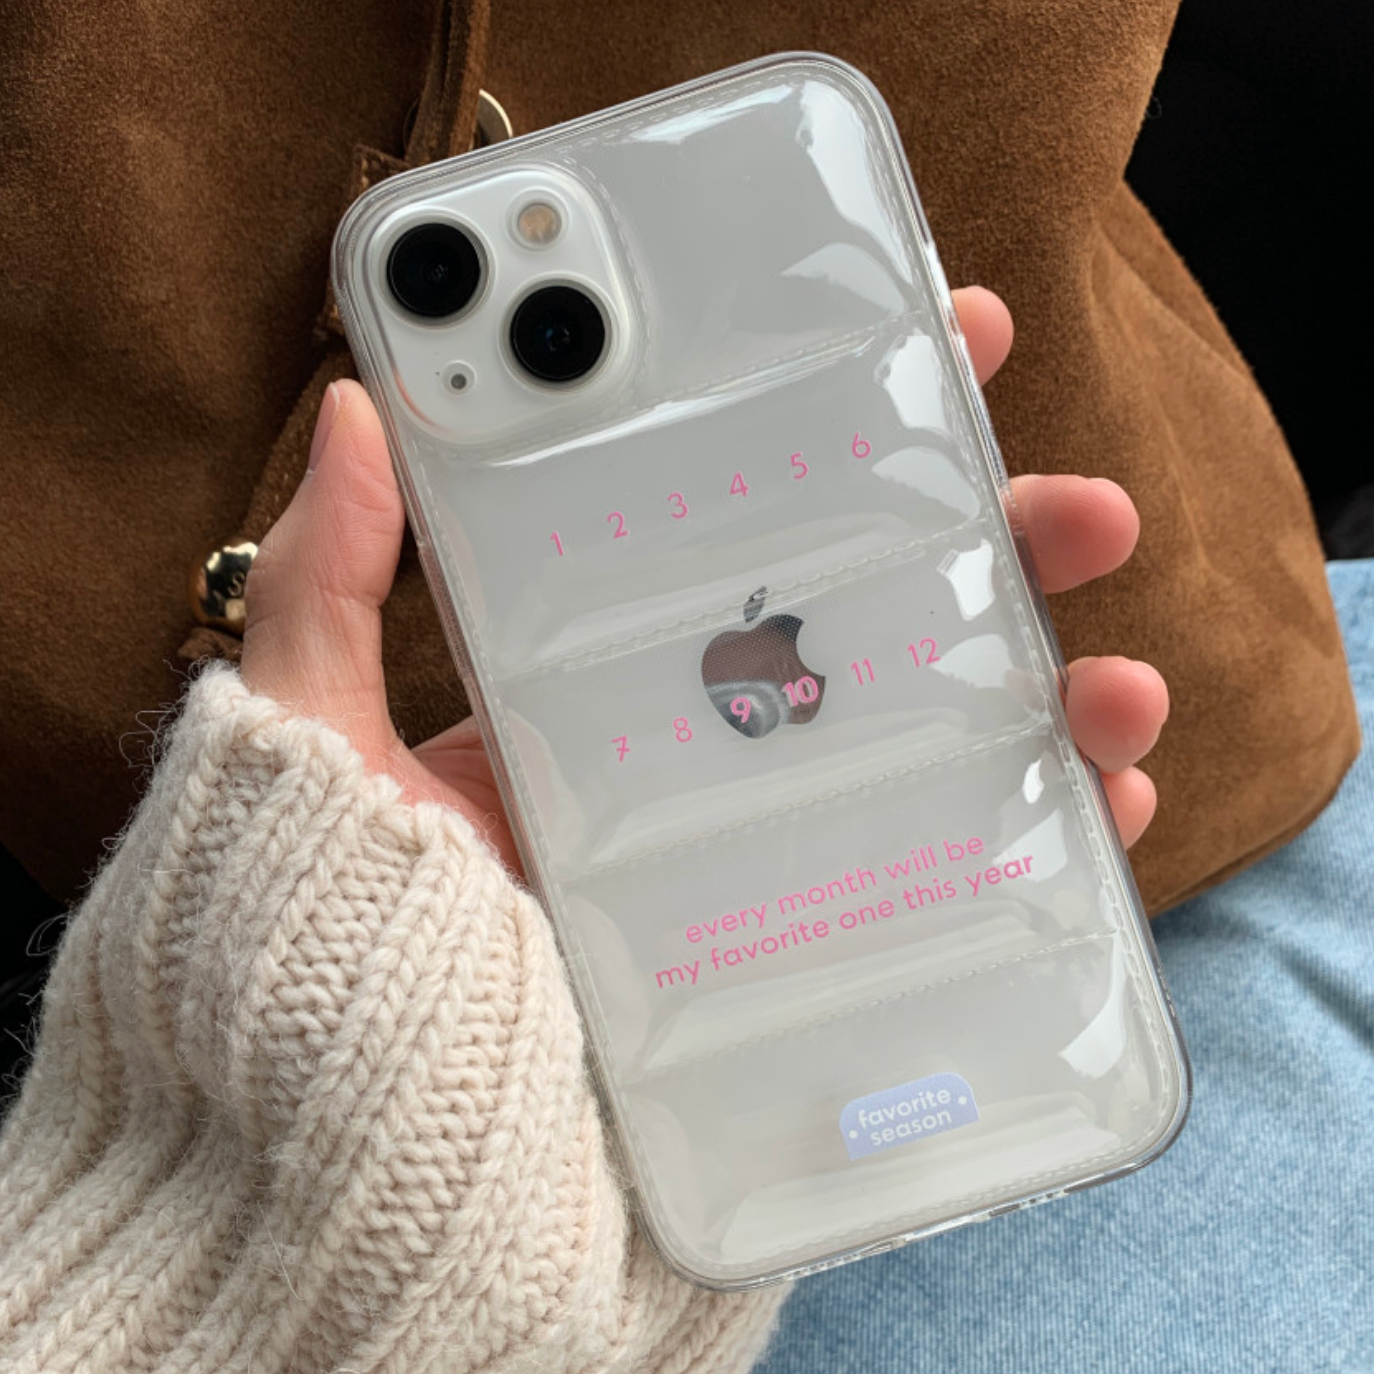 [page seasoning] Every Month Phone Case